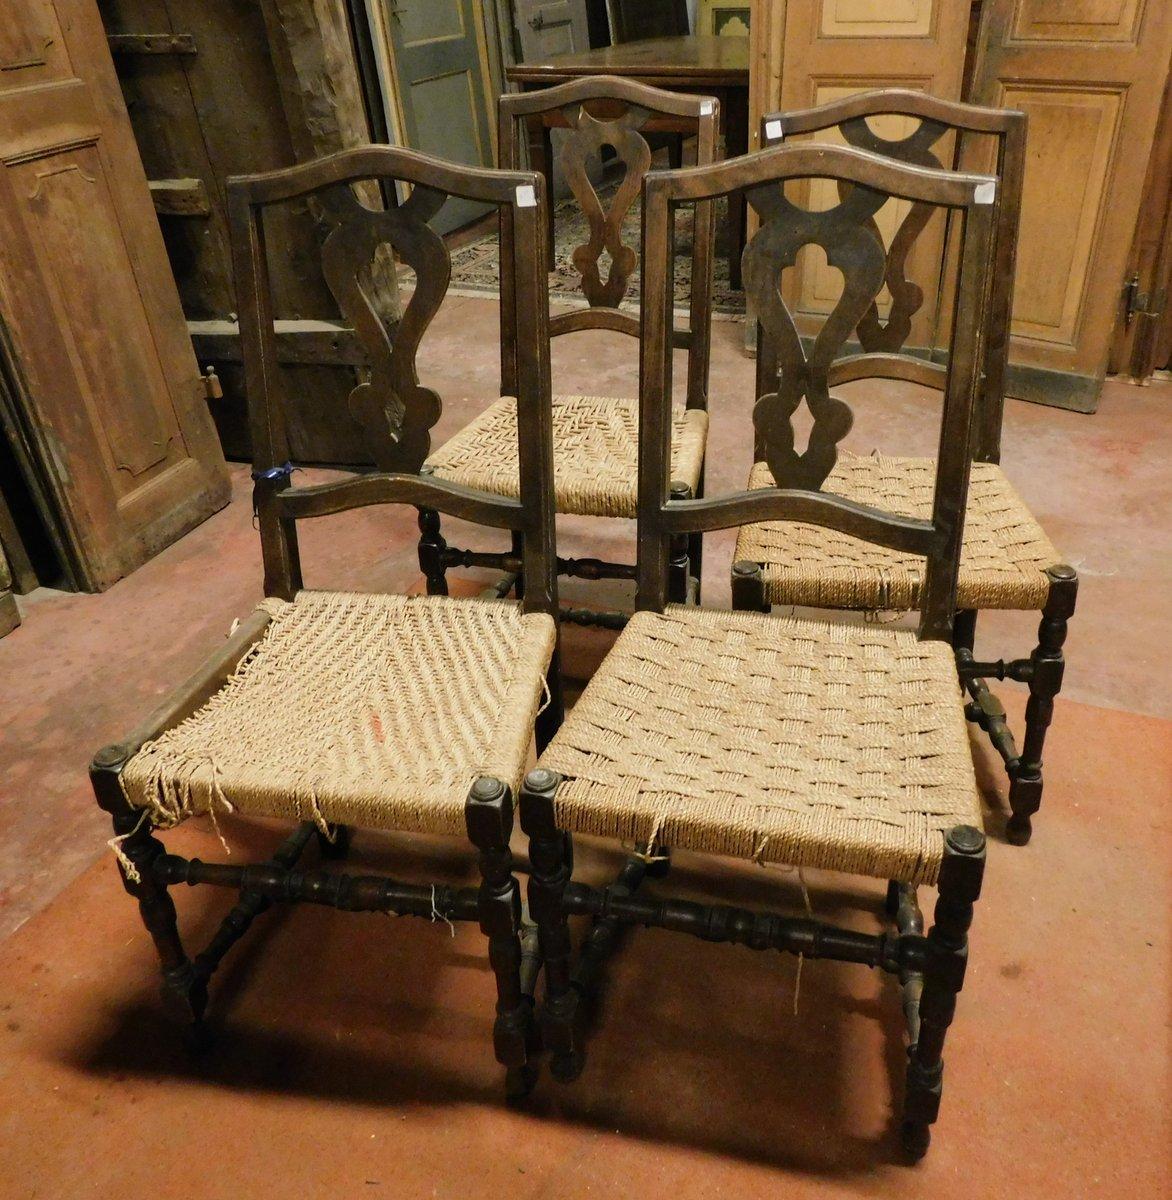 Antique set of 6 brown walnut chairs, with seat in yellow woven straw, to be restored in the seats but very ancient and elegant, impossible to find in the whole set, coming from the 18th century house in Italy.
1 chair is to restored and minimally